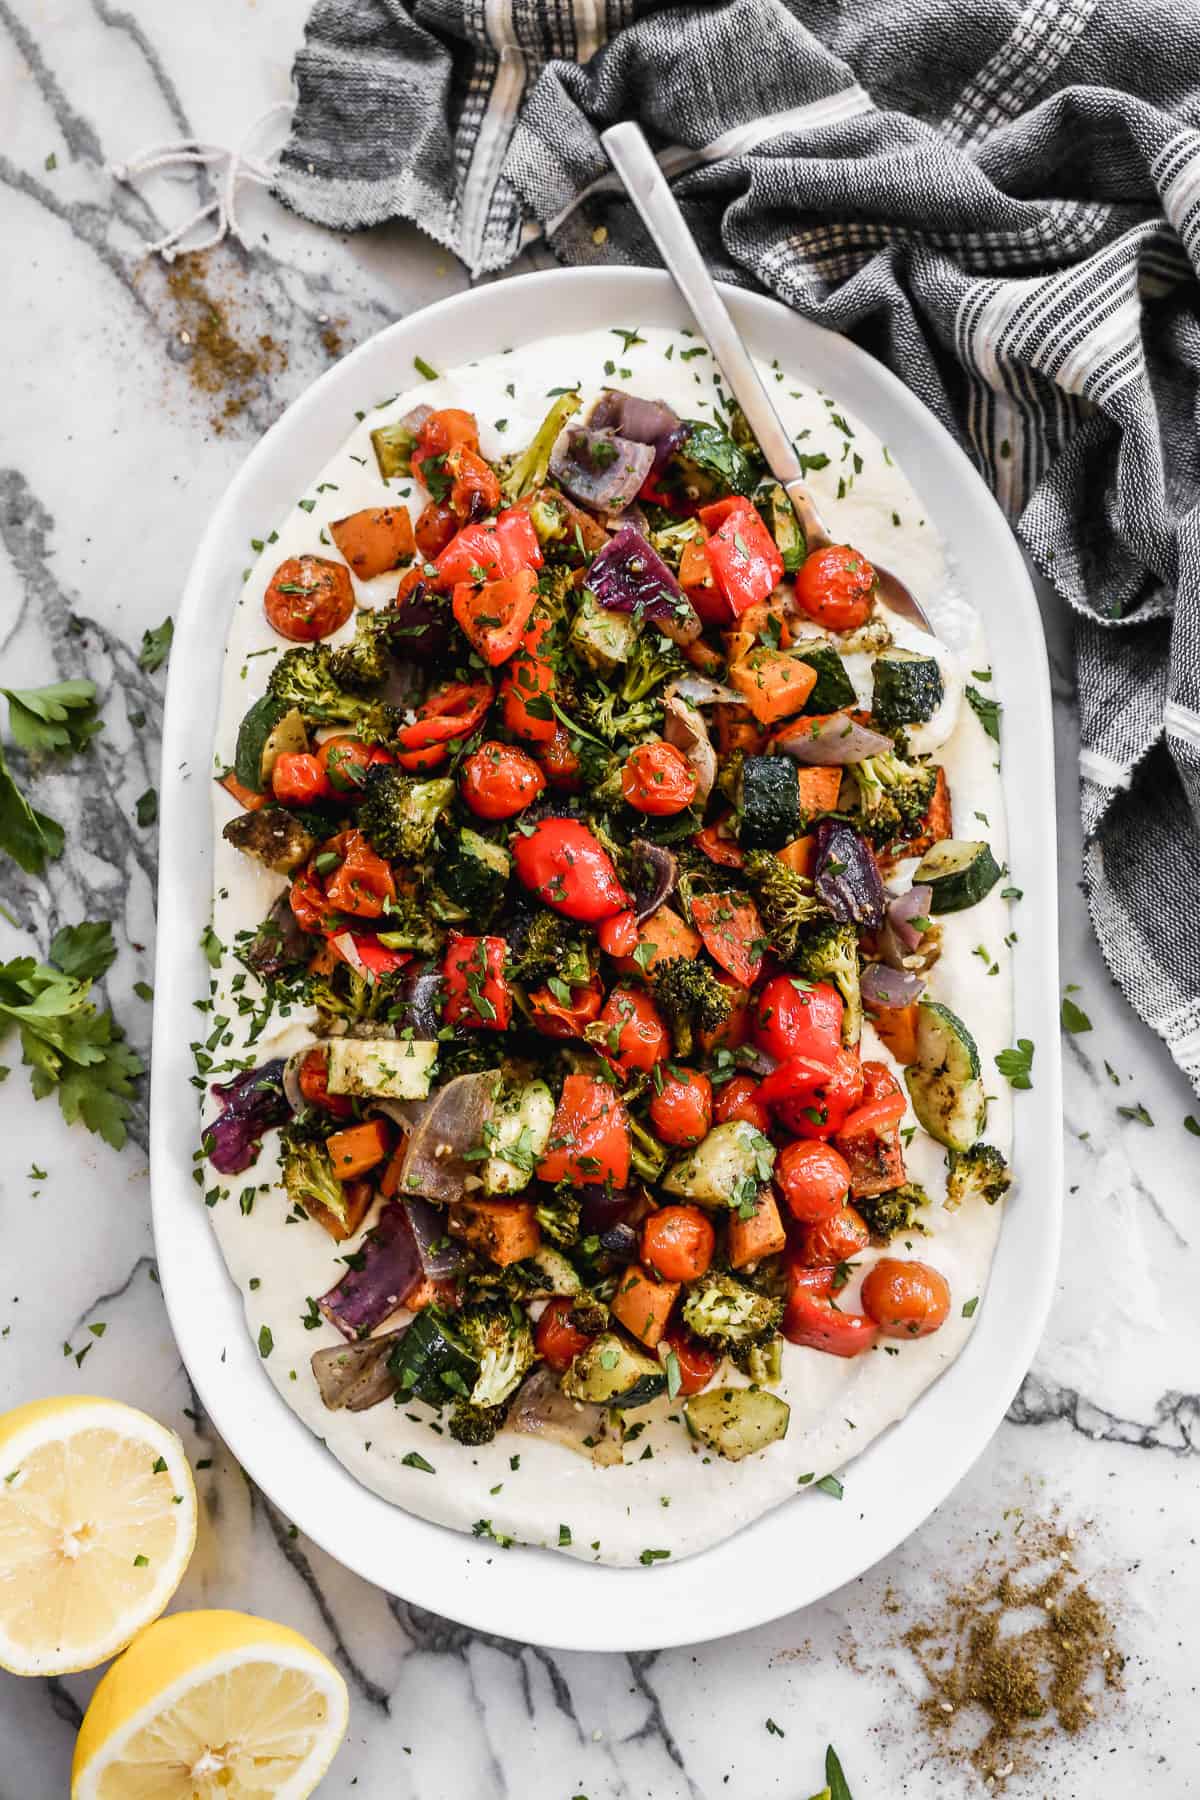 A whipped feta recipe with roasted vegetables on a bed of whipped feta.